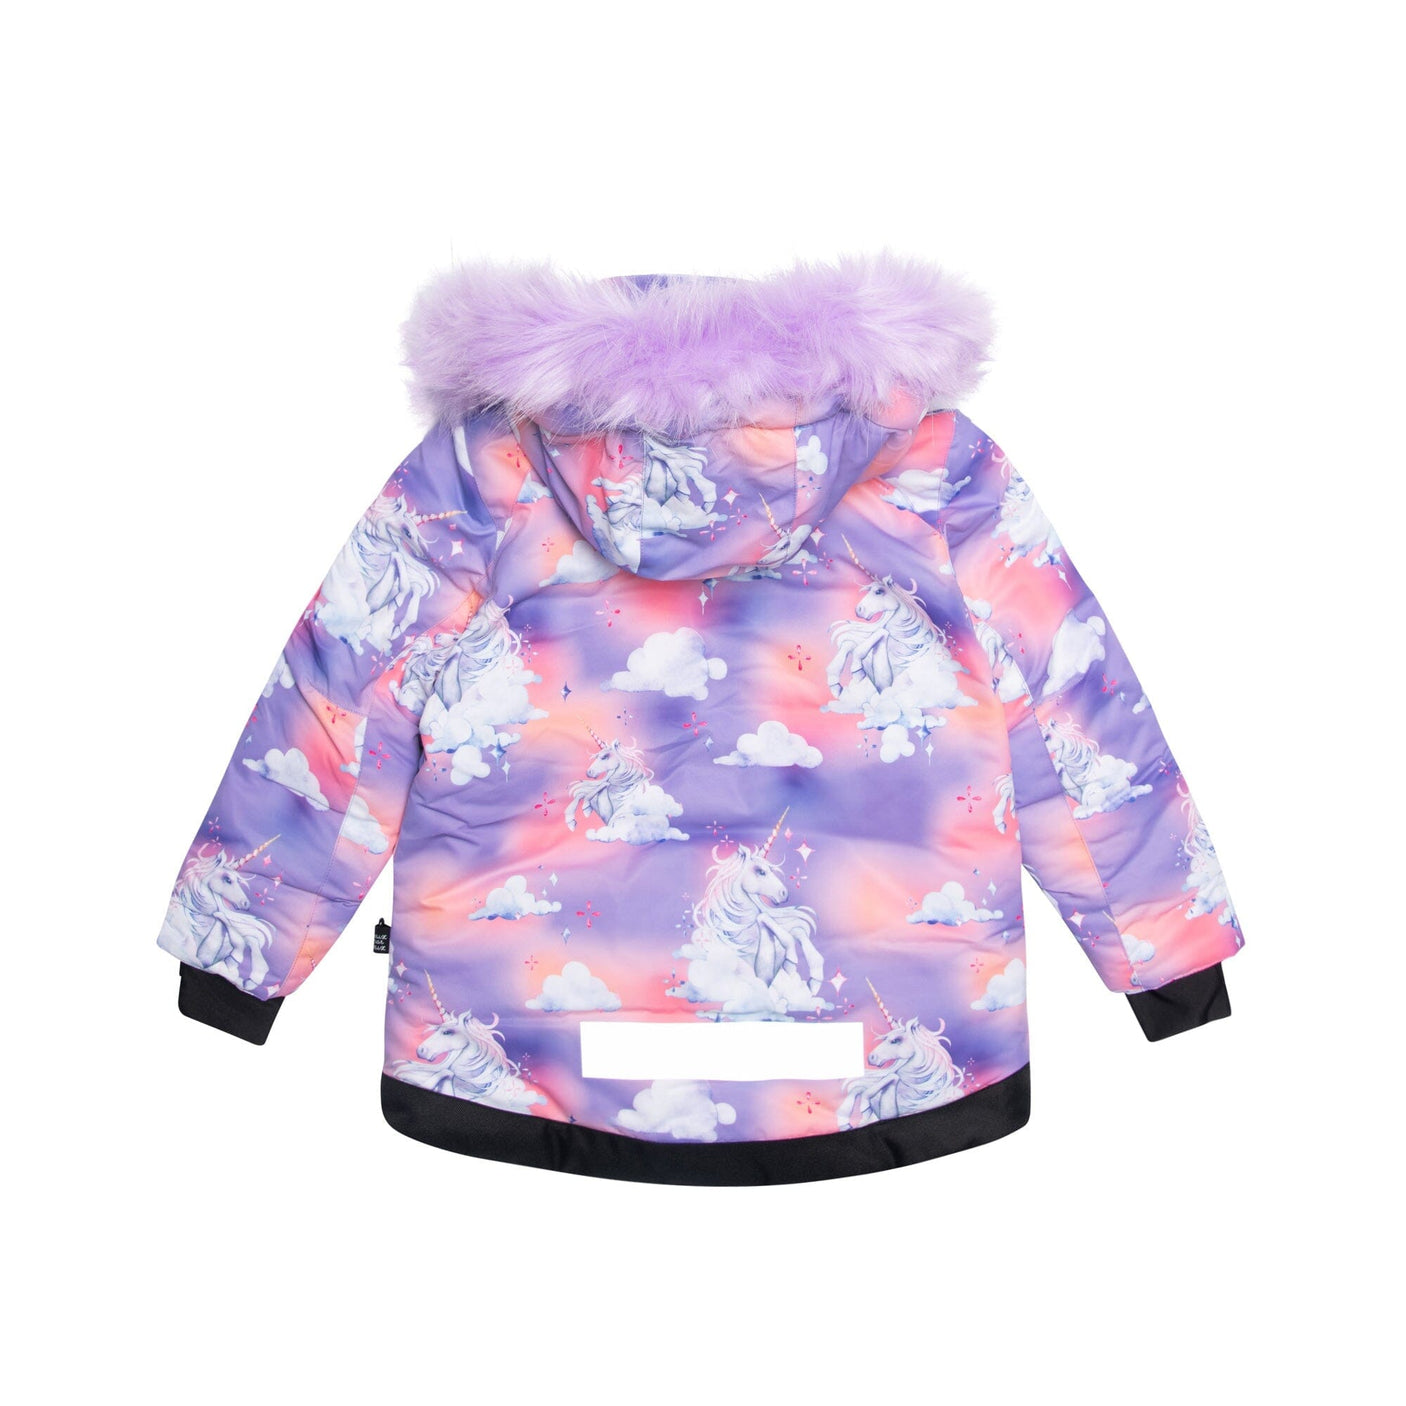 Two Piece Snowsuit Unicorns In The Clouds Print With Lavender Pant-5